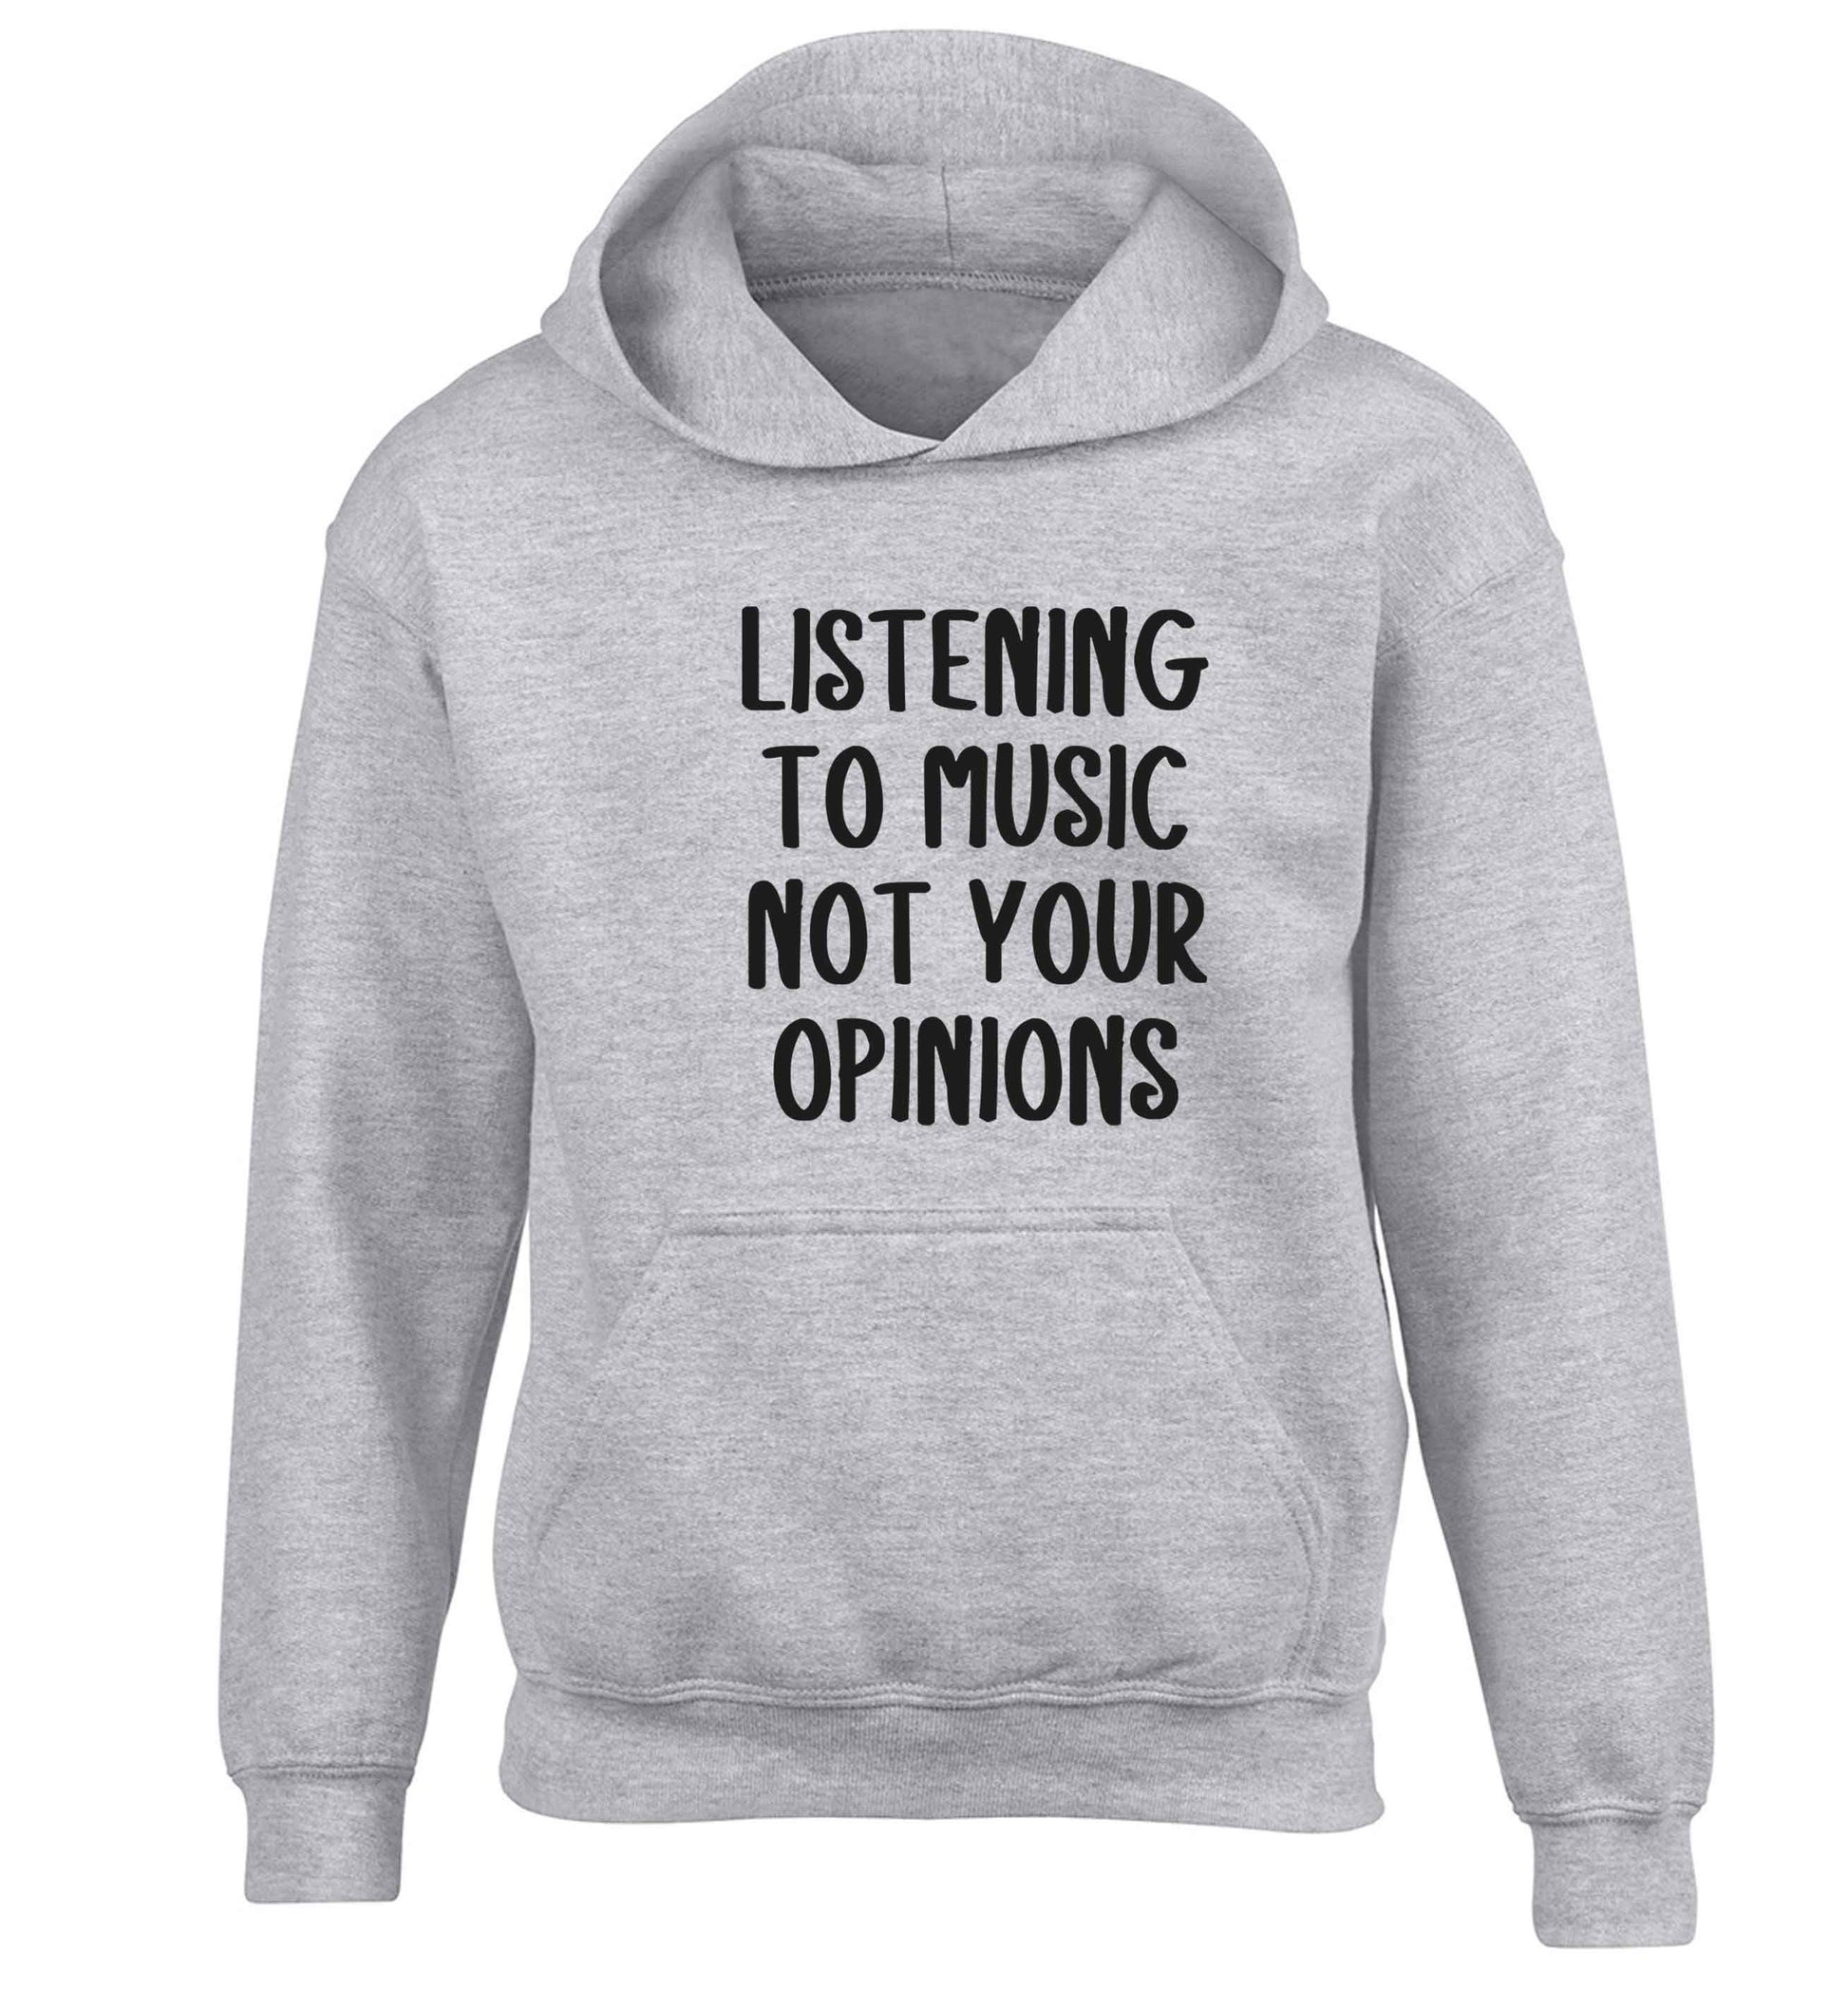 Listening to music not your opinions children's grey hoodie 12-13 Years